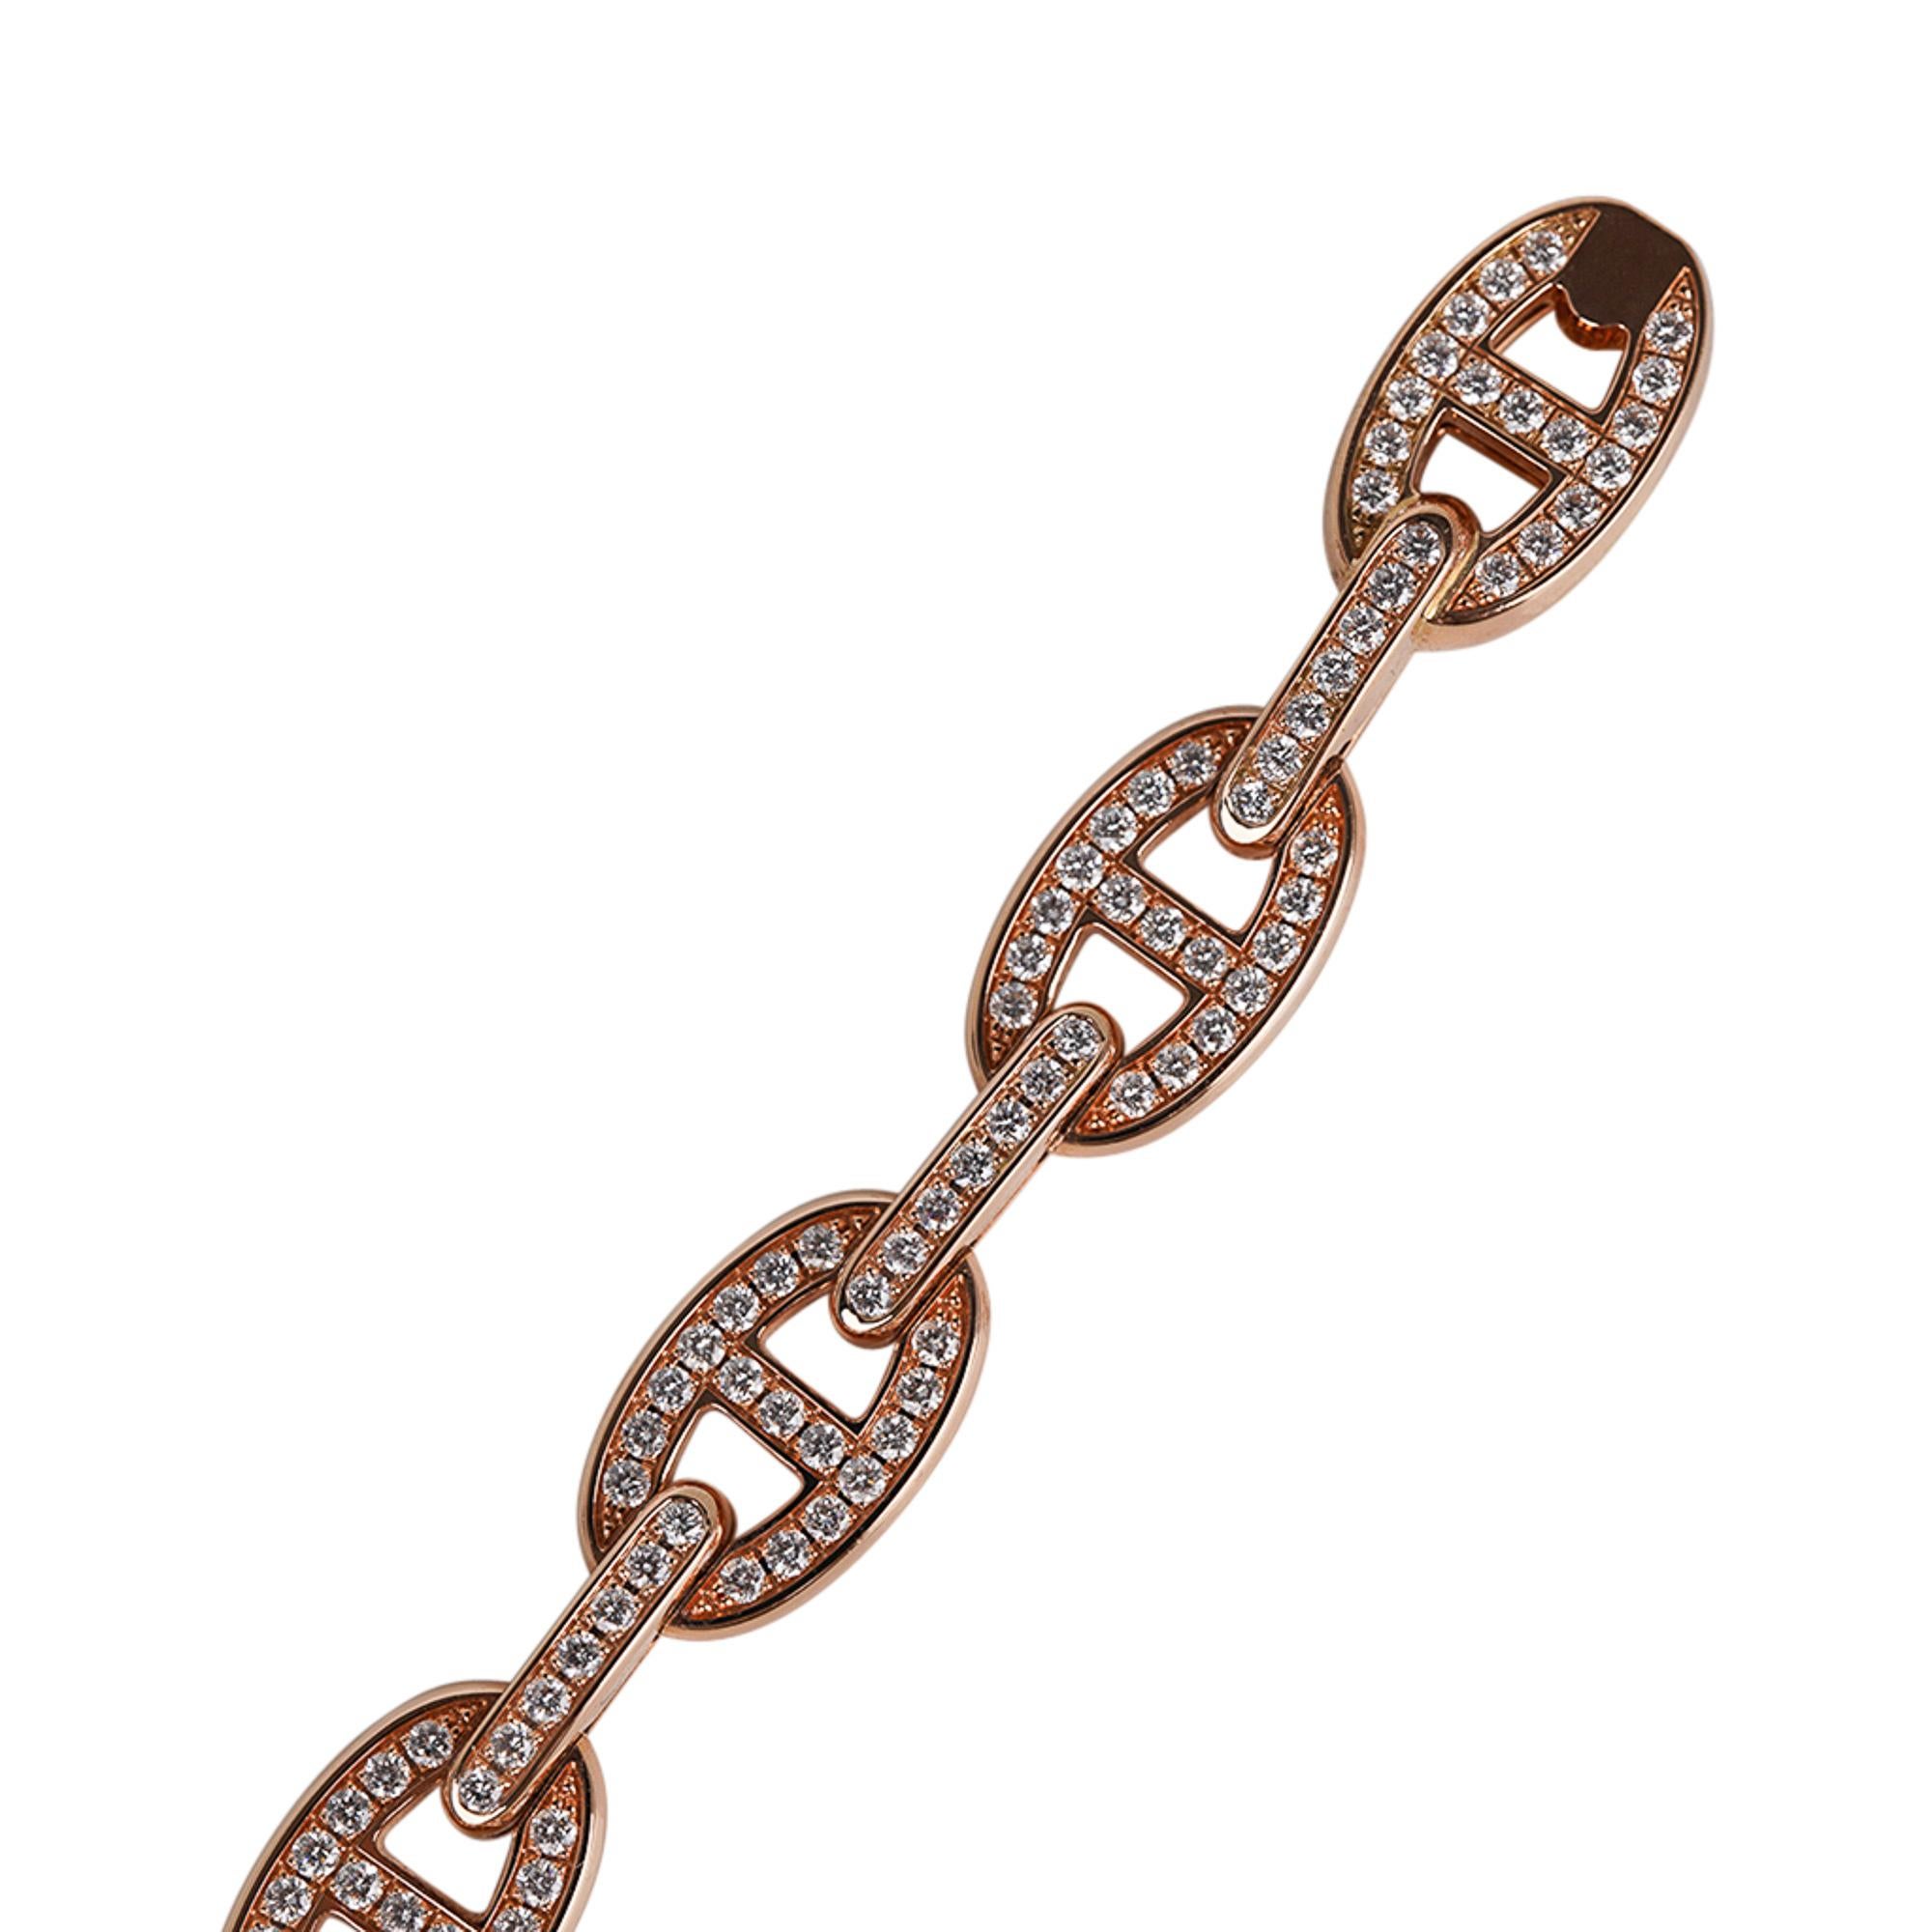 Mightychic offers a Hermes Chaine d'Ancre Enchainee Diamond bracelet.
264 Diamonds set in rose gold.
Chic and instantly recognizable.
Total carat weight is 1.64
Bracelet has signature stamps inside.
Comes with signature Hermes gift box.
NEW or NEVER